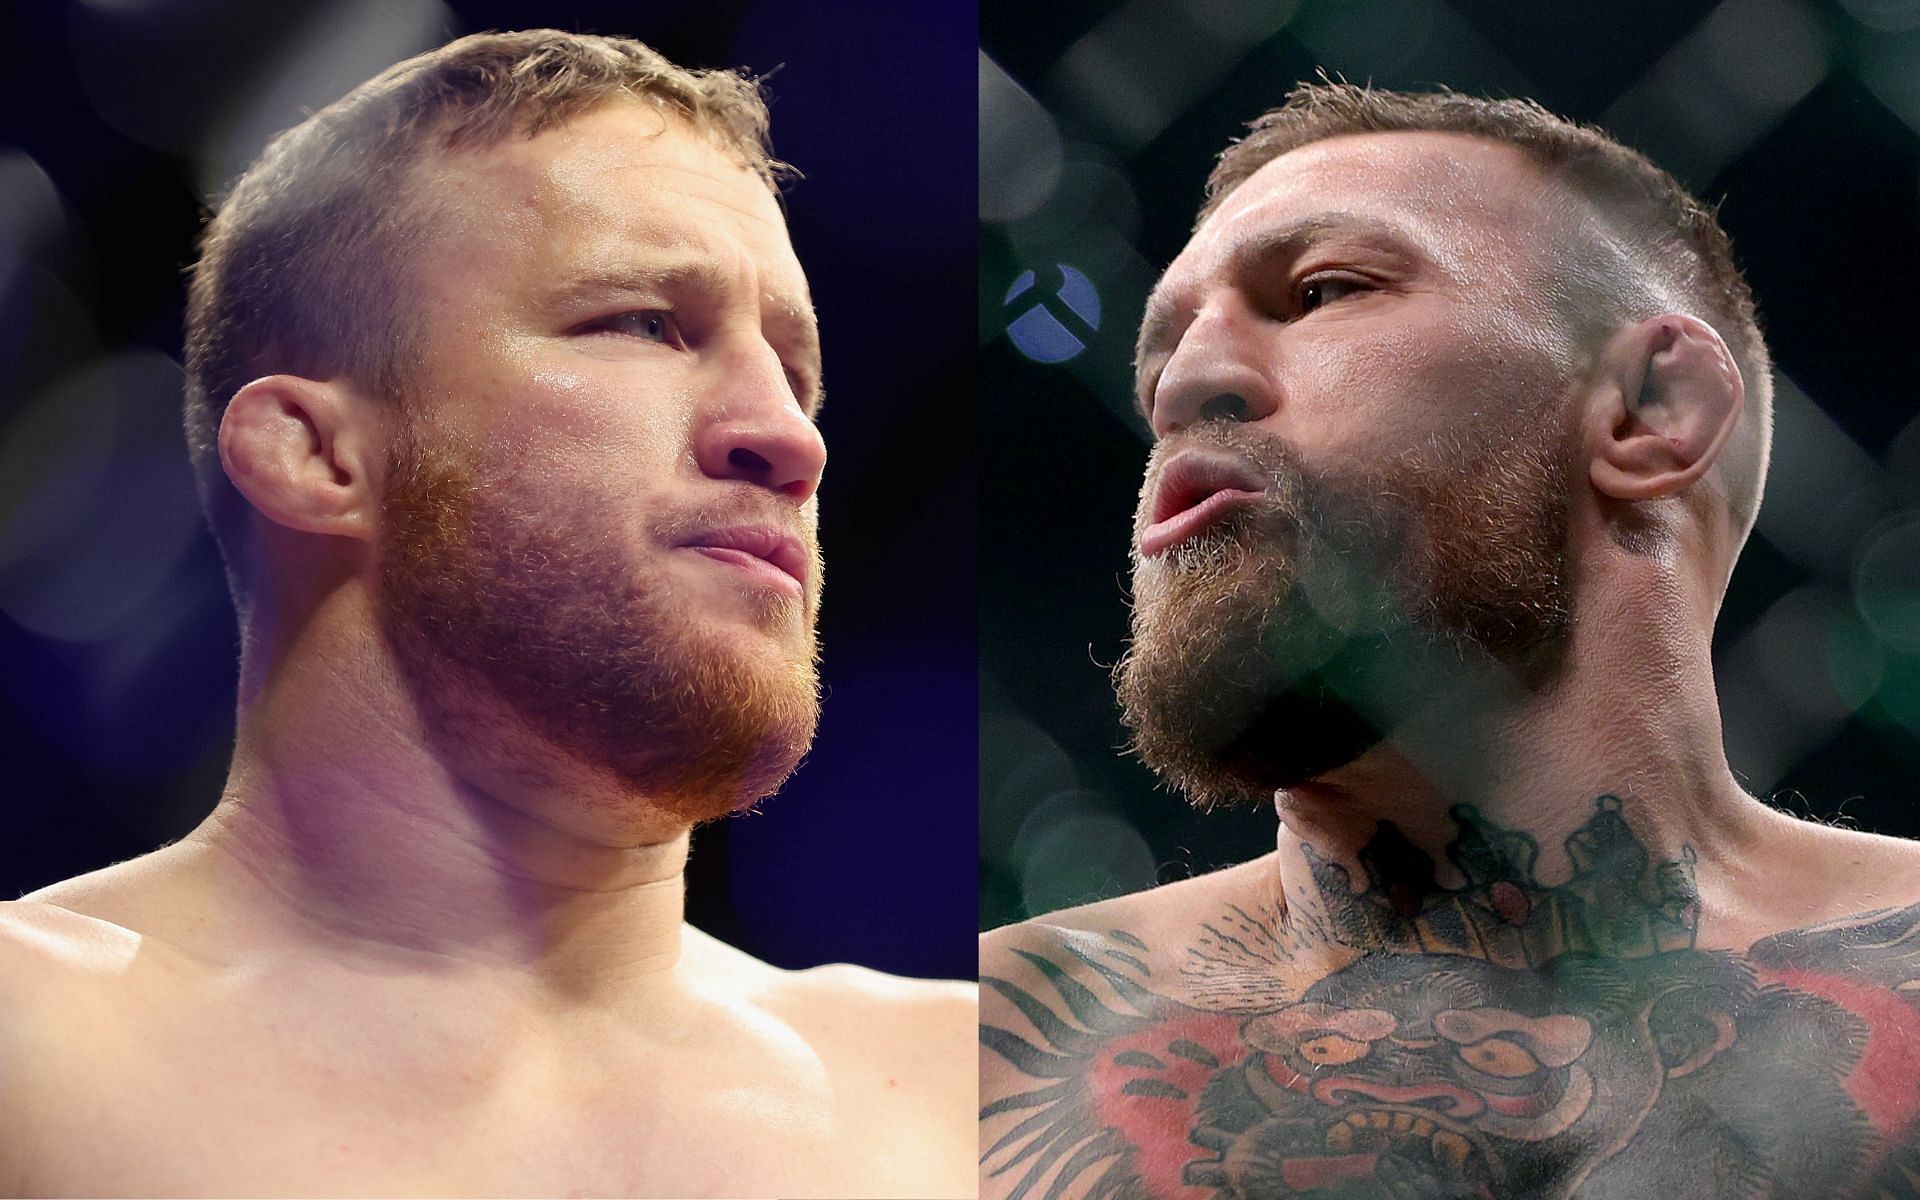 Justin Gaethje (left) and Conor McGregor (right). [via Getty Images]